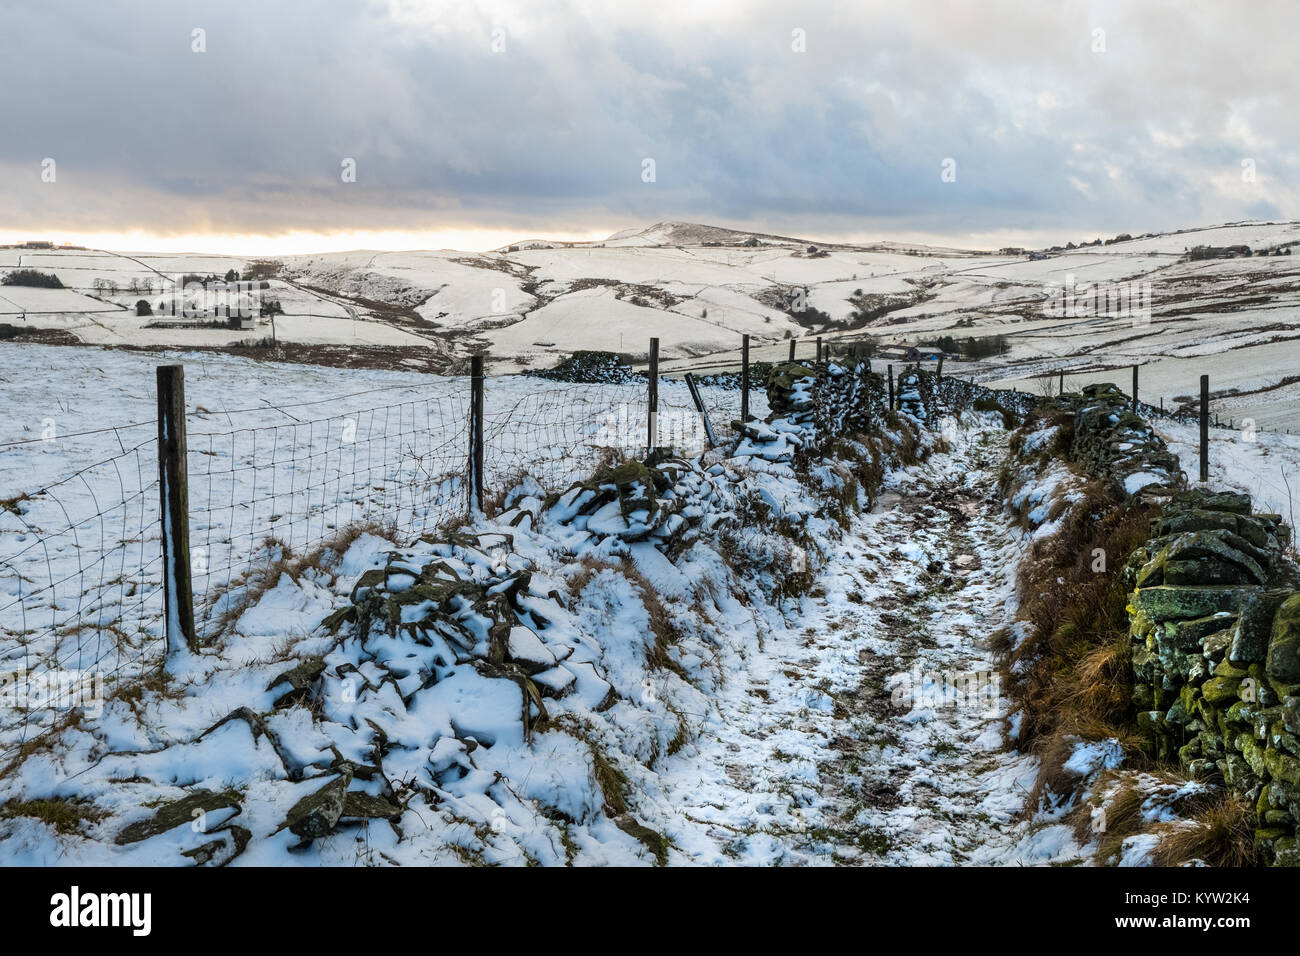 A bridleway in Brandside, an isolated farming community near Buxton, Peak District National Park. Winter. Stock Photo